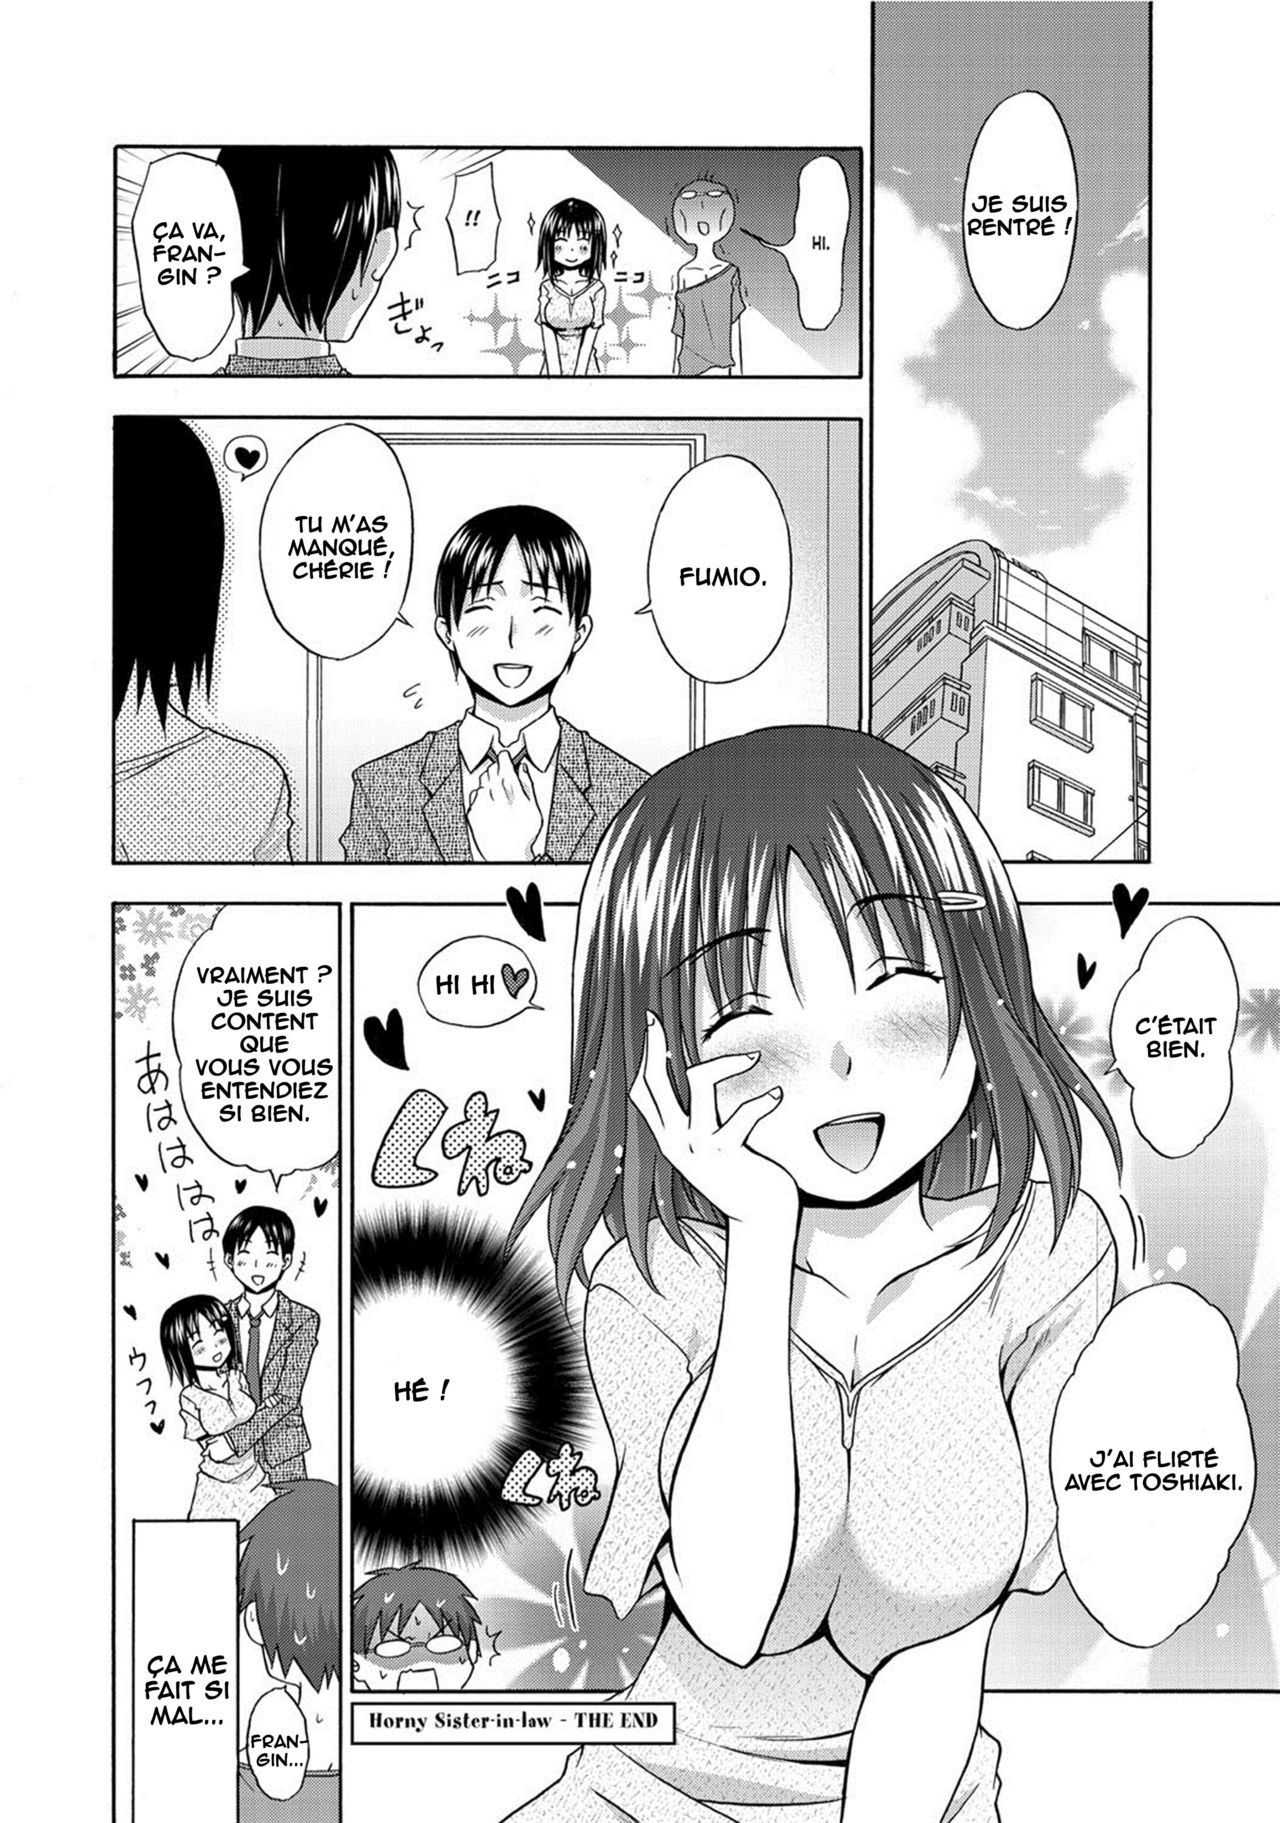 Hatsujou Aniyome  Horny Sister-in-law numero d'image 15